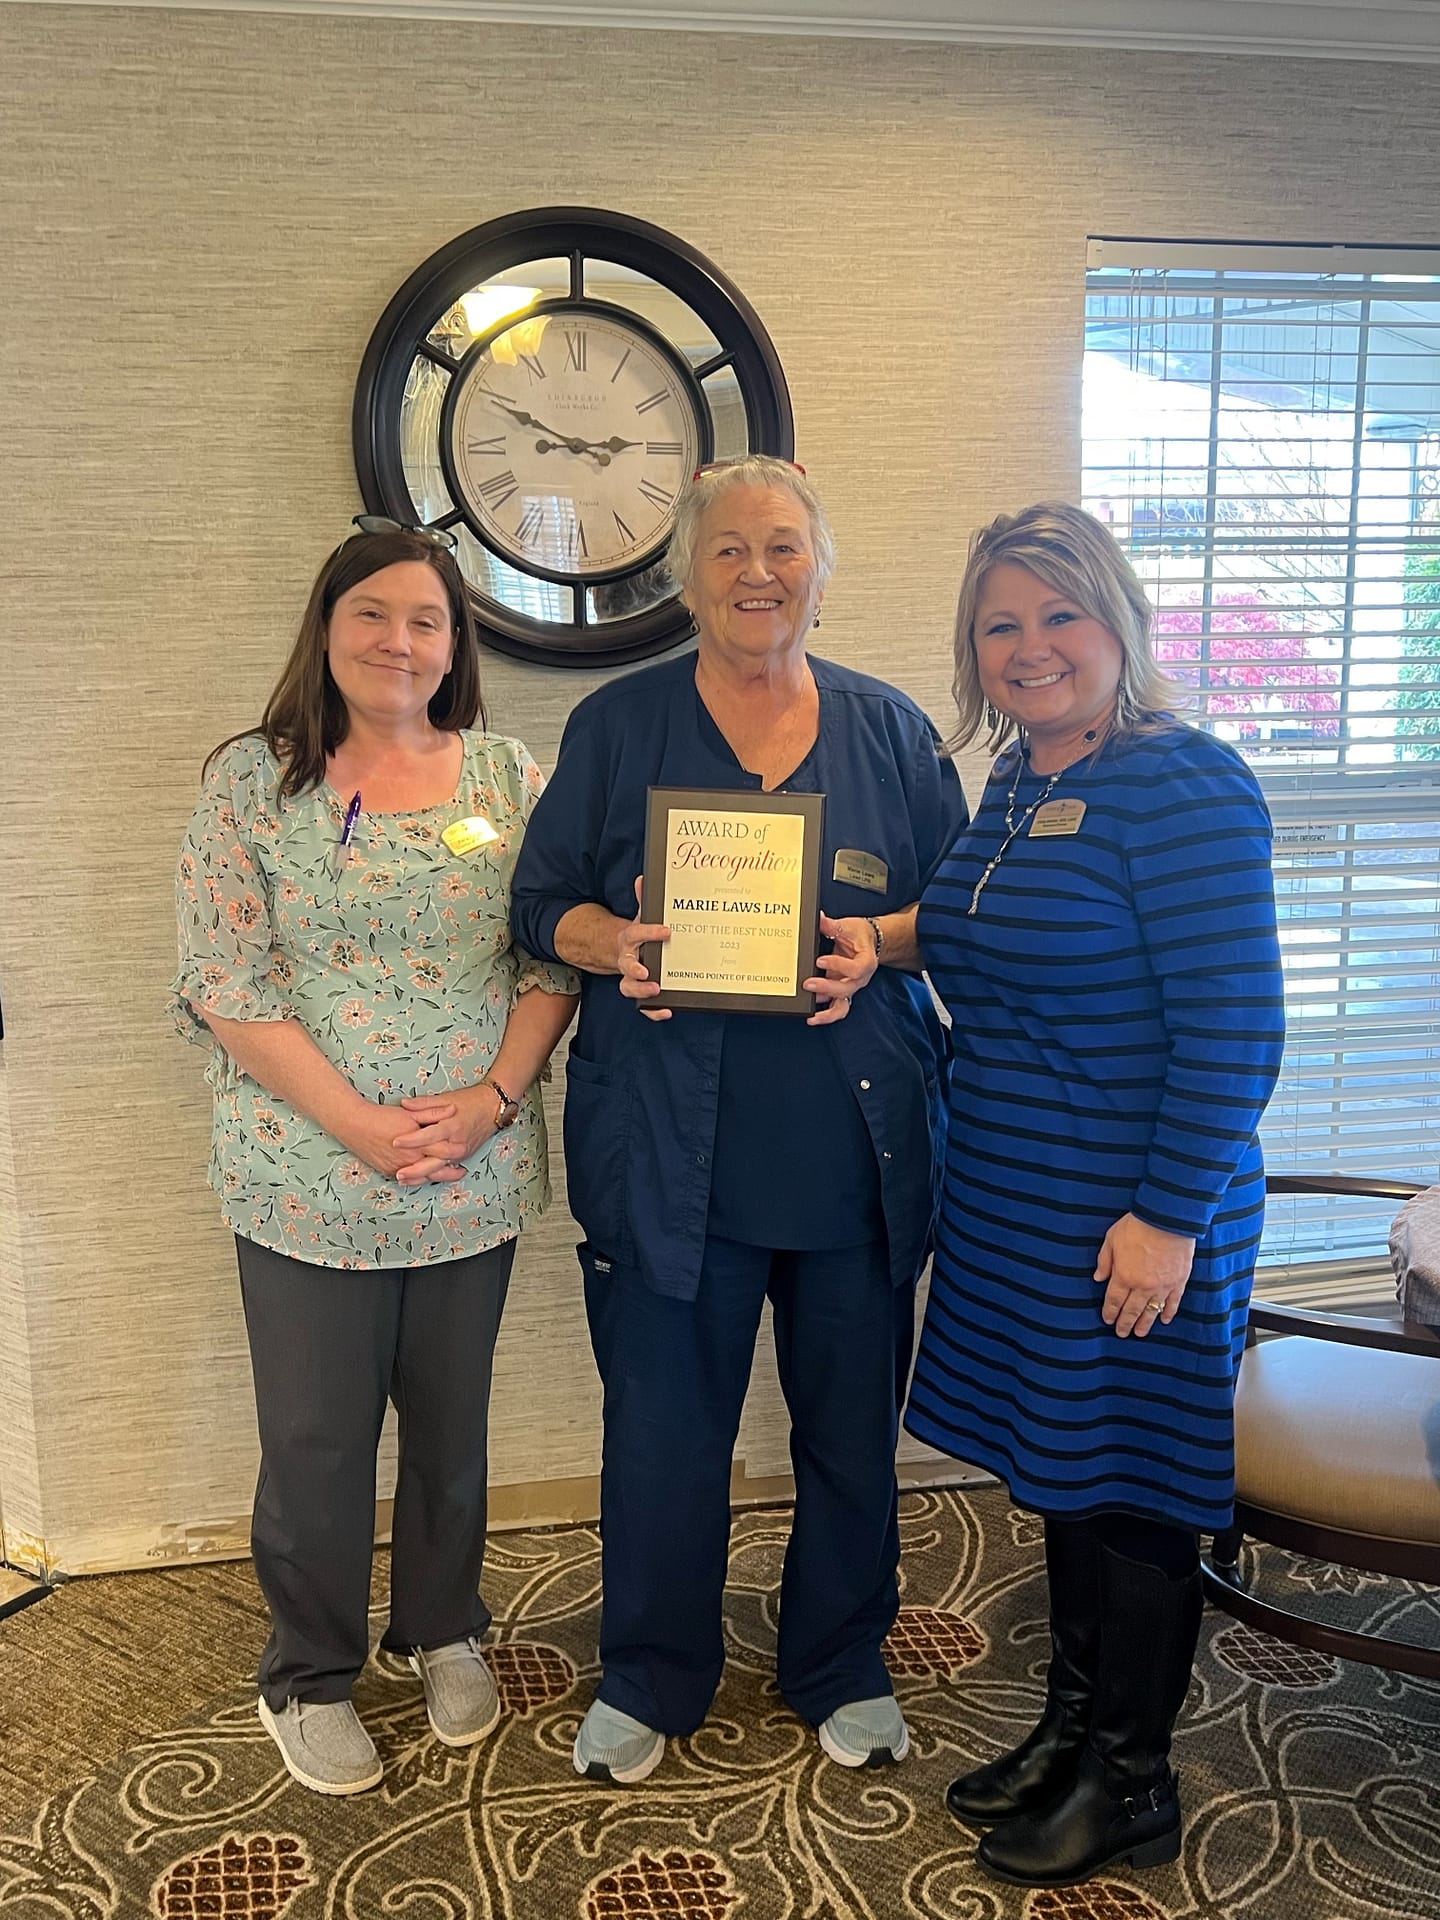 photo of Marie Laws, Best of the Best Nurse, with Kena Fields, Director of Nursing, left, and Cristy Winkler, Executive Director